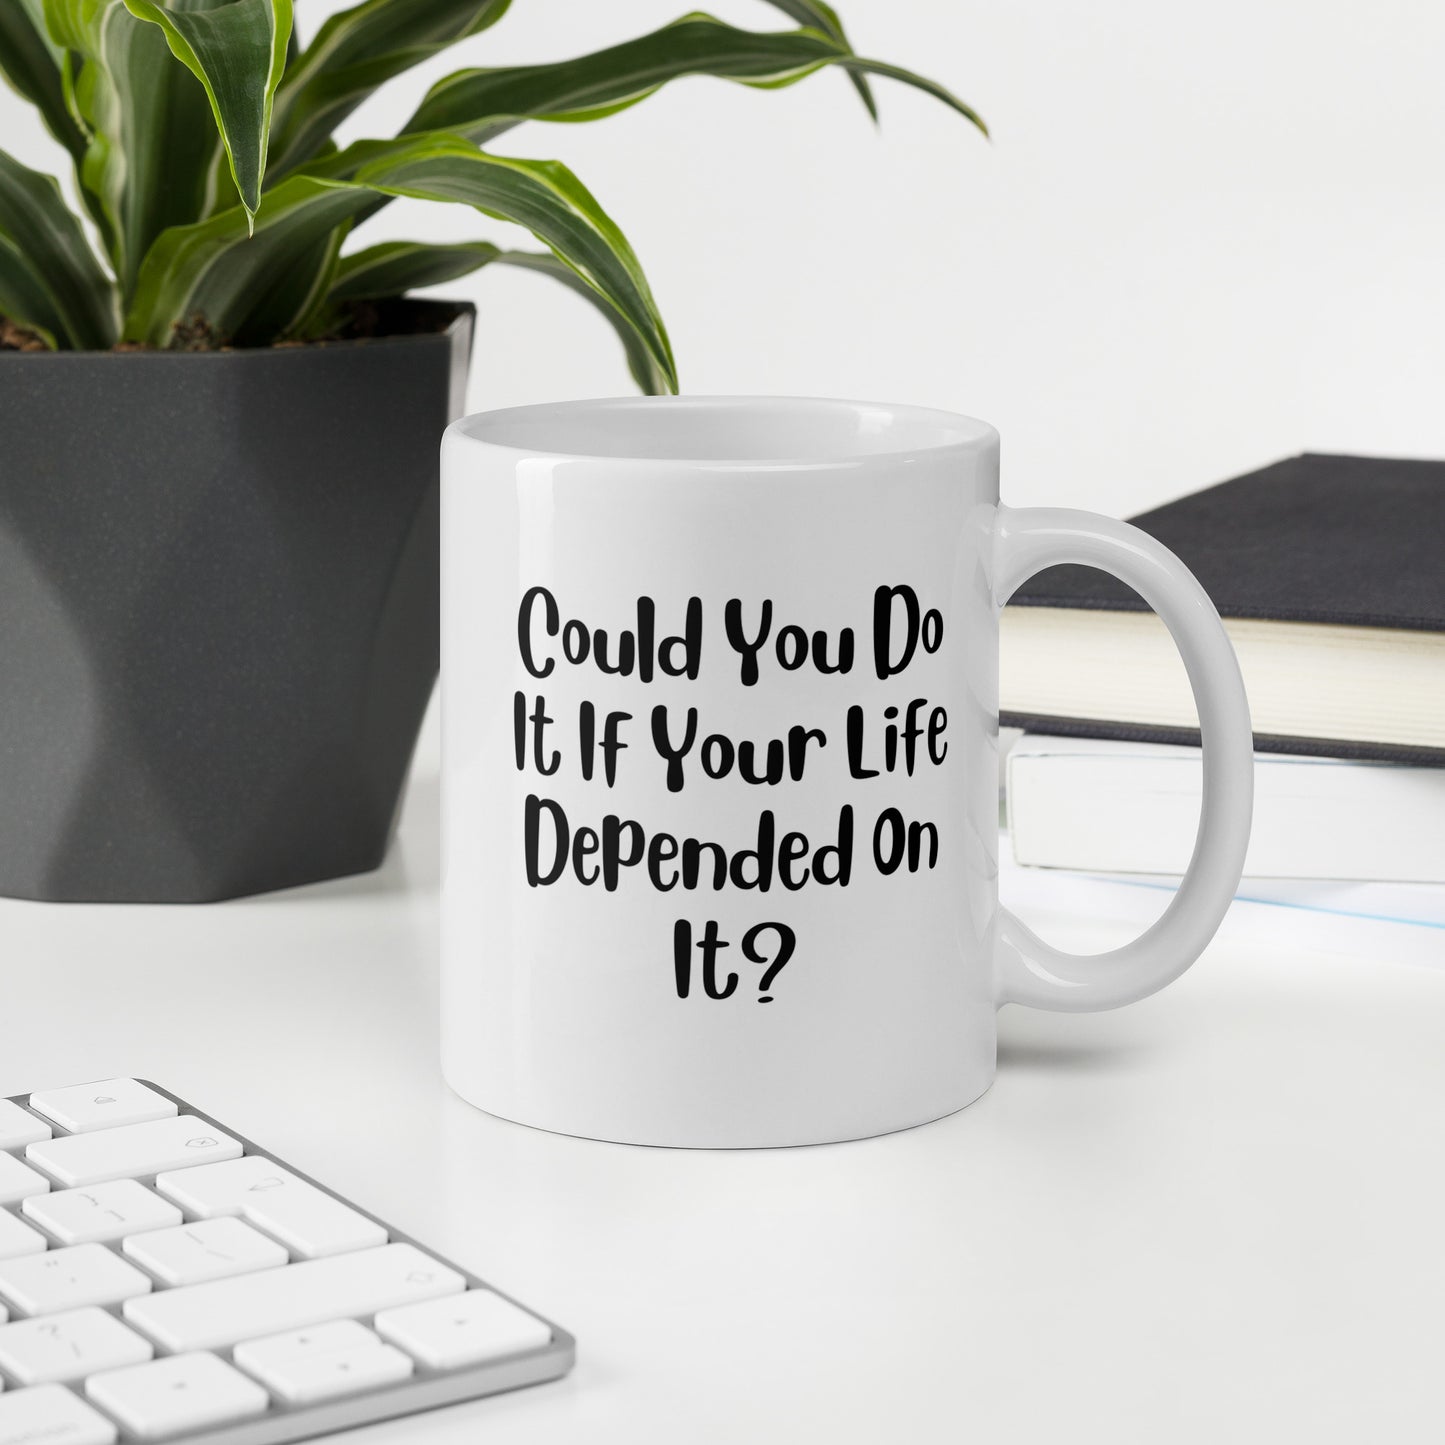 Could You Do It If Your Life Depended On It White Ceramic Coffee Mug